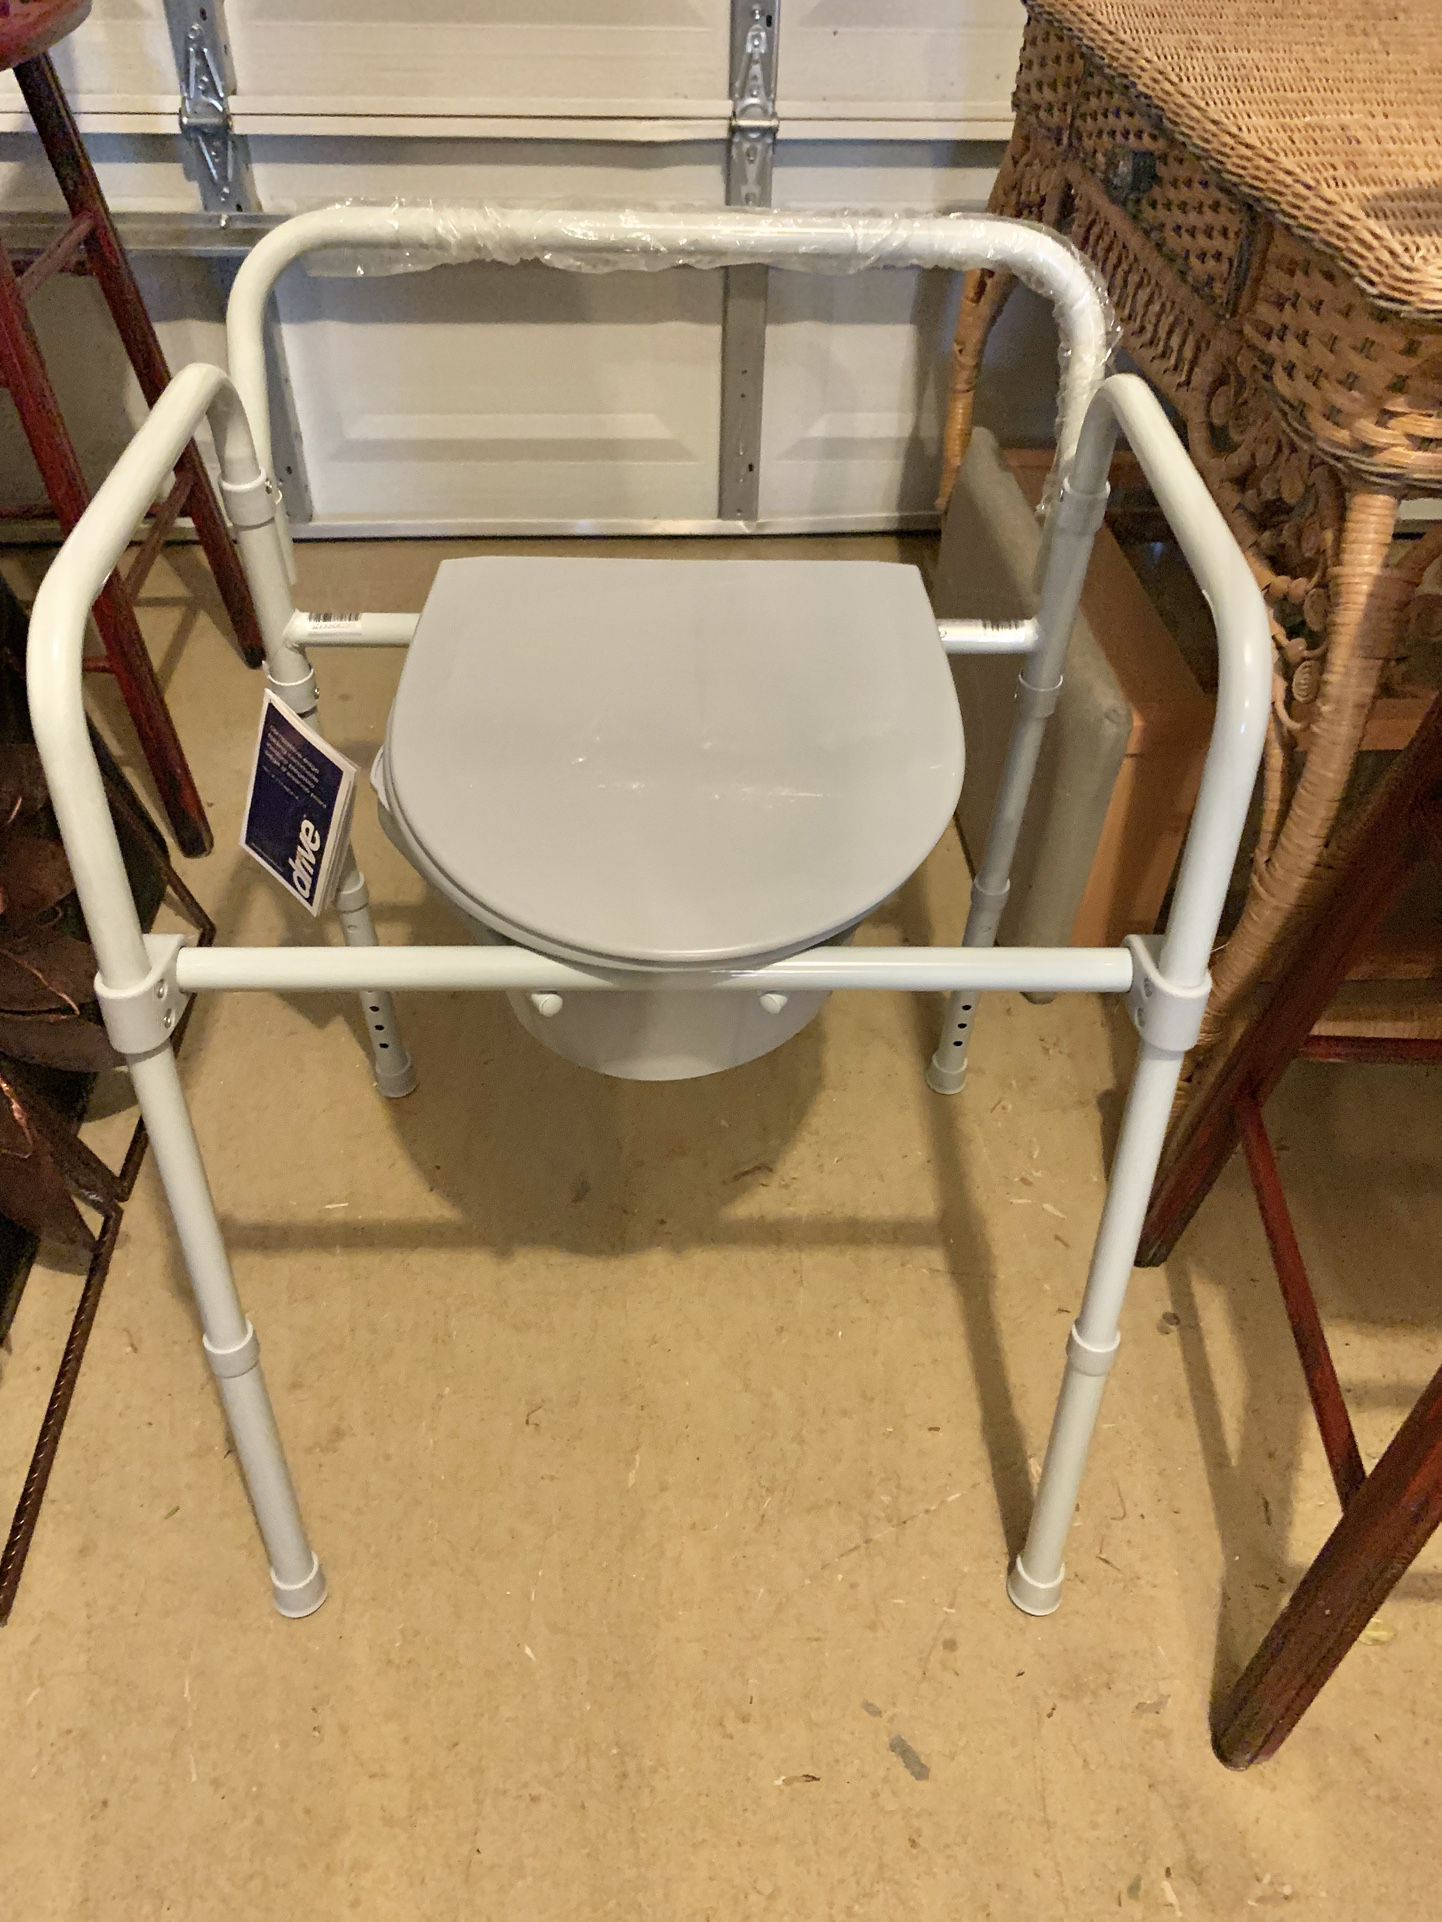 Brand new never used tag attached plastic attached All-In-One Steel Folding Commode Toliet 11148N-4 by Drive Medical 